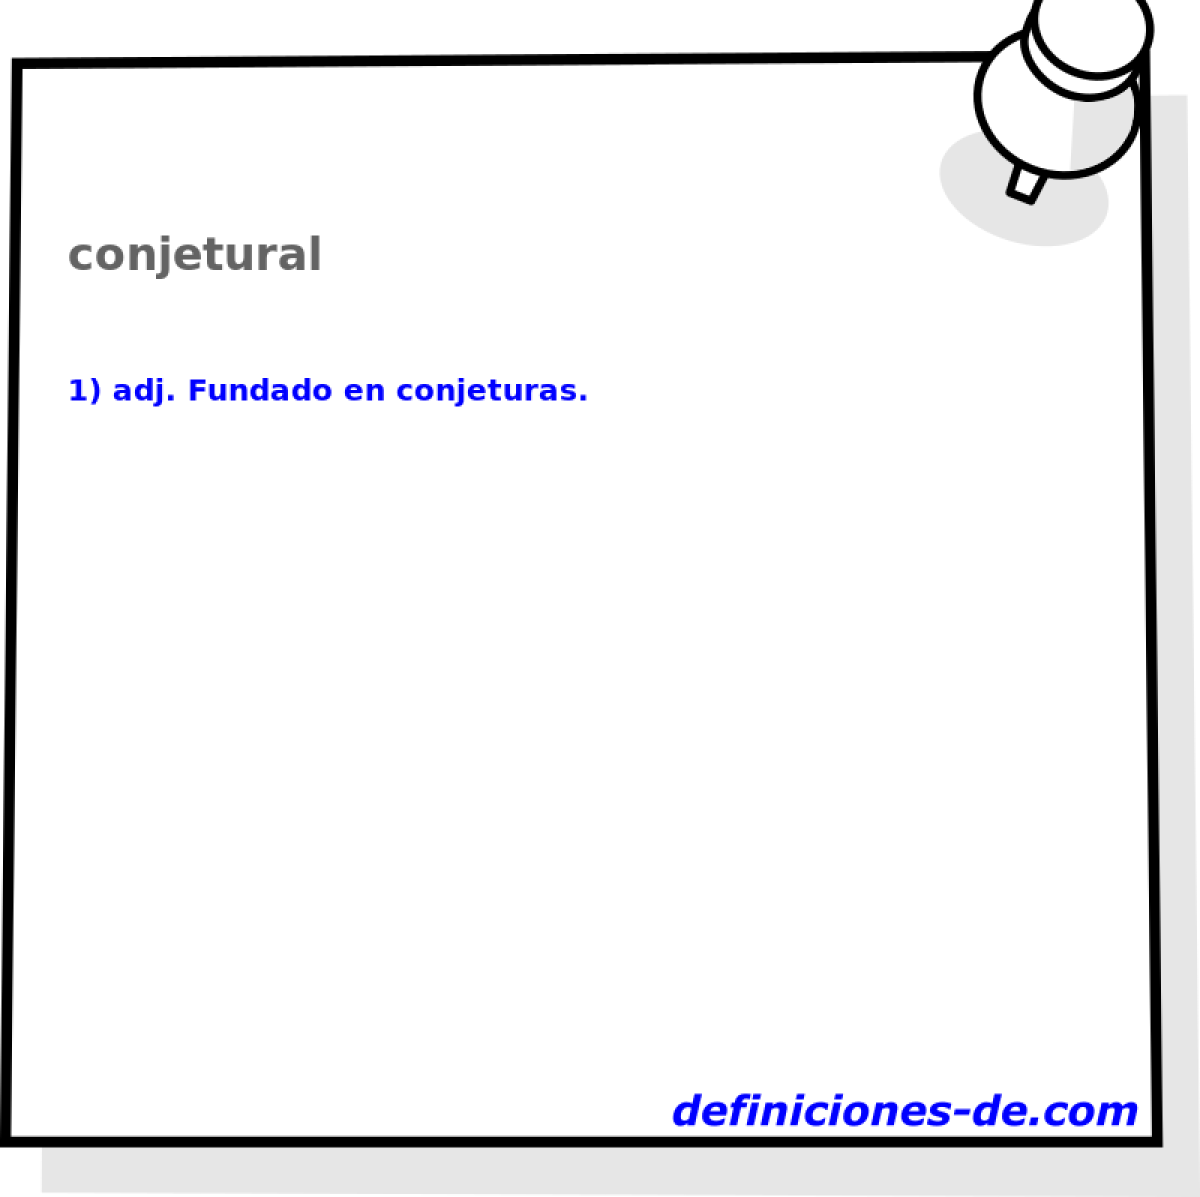 conjetural 